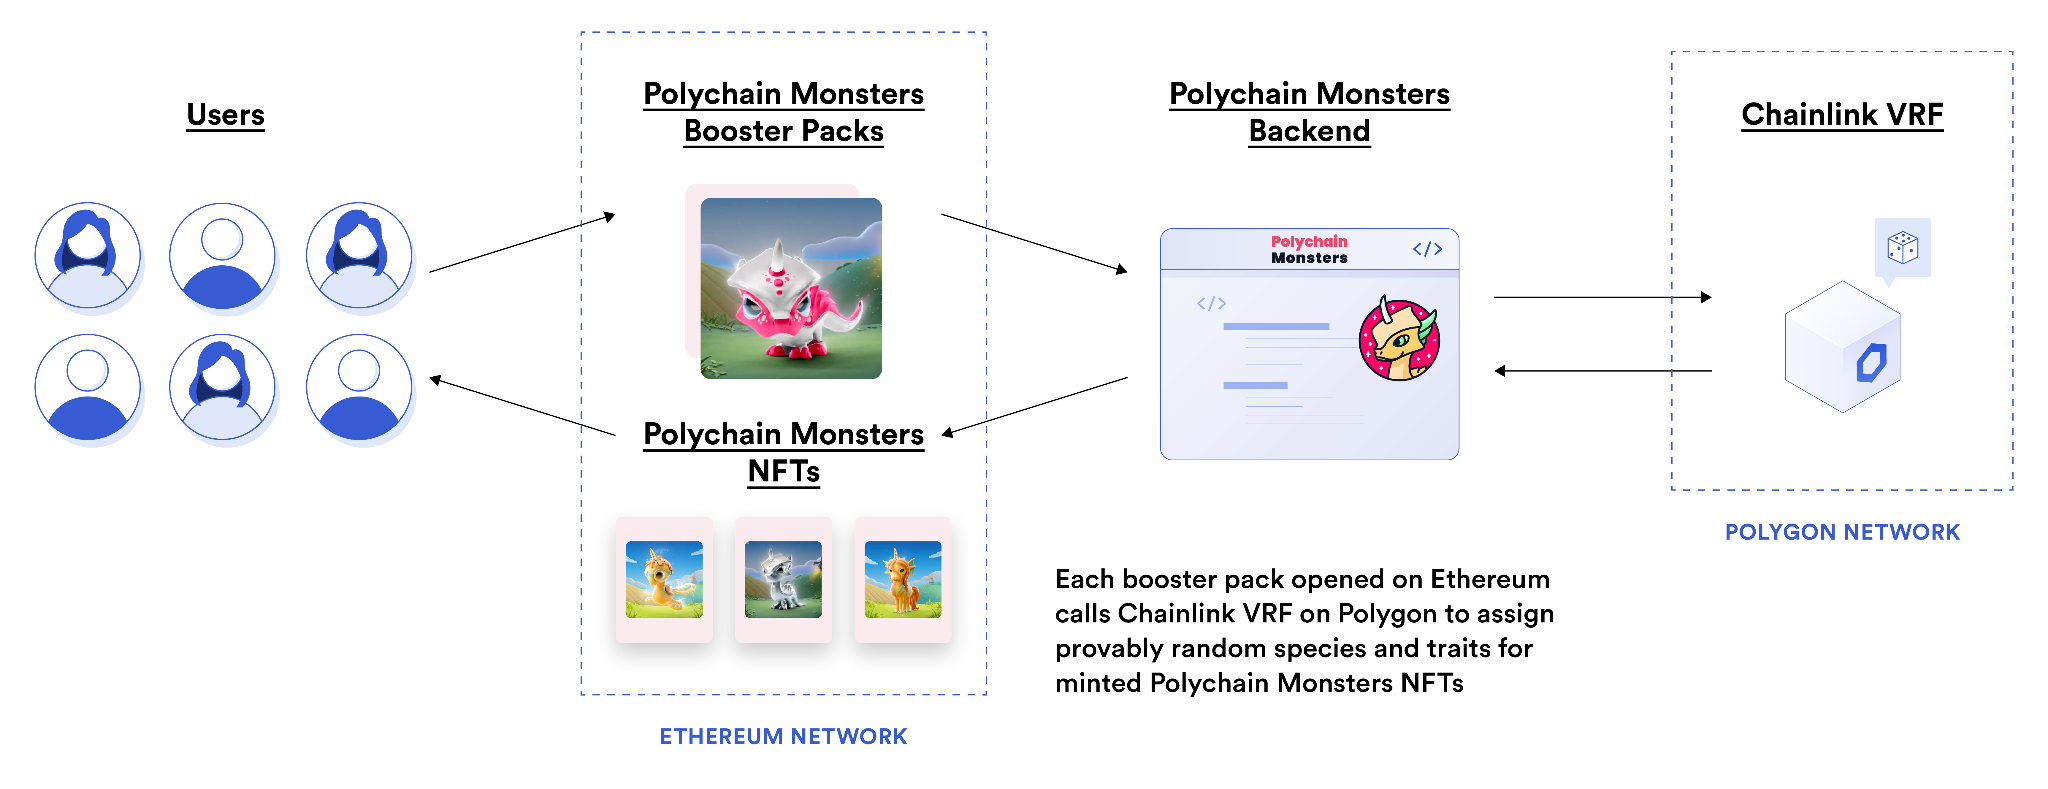 A diagram showing how Polychain Monsters uses Chainlink VRF to mint provably random NFTs.